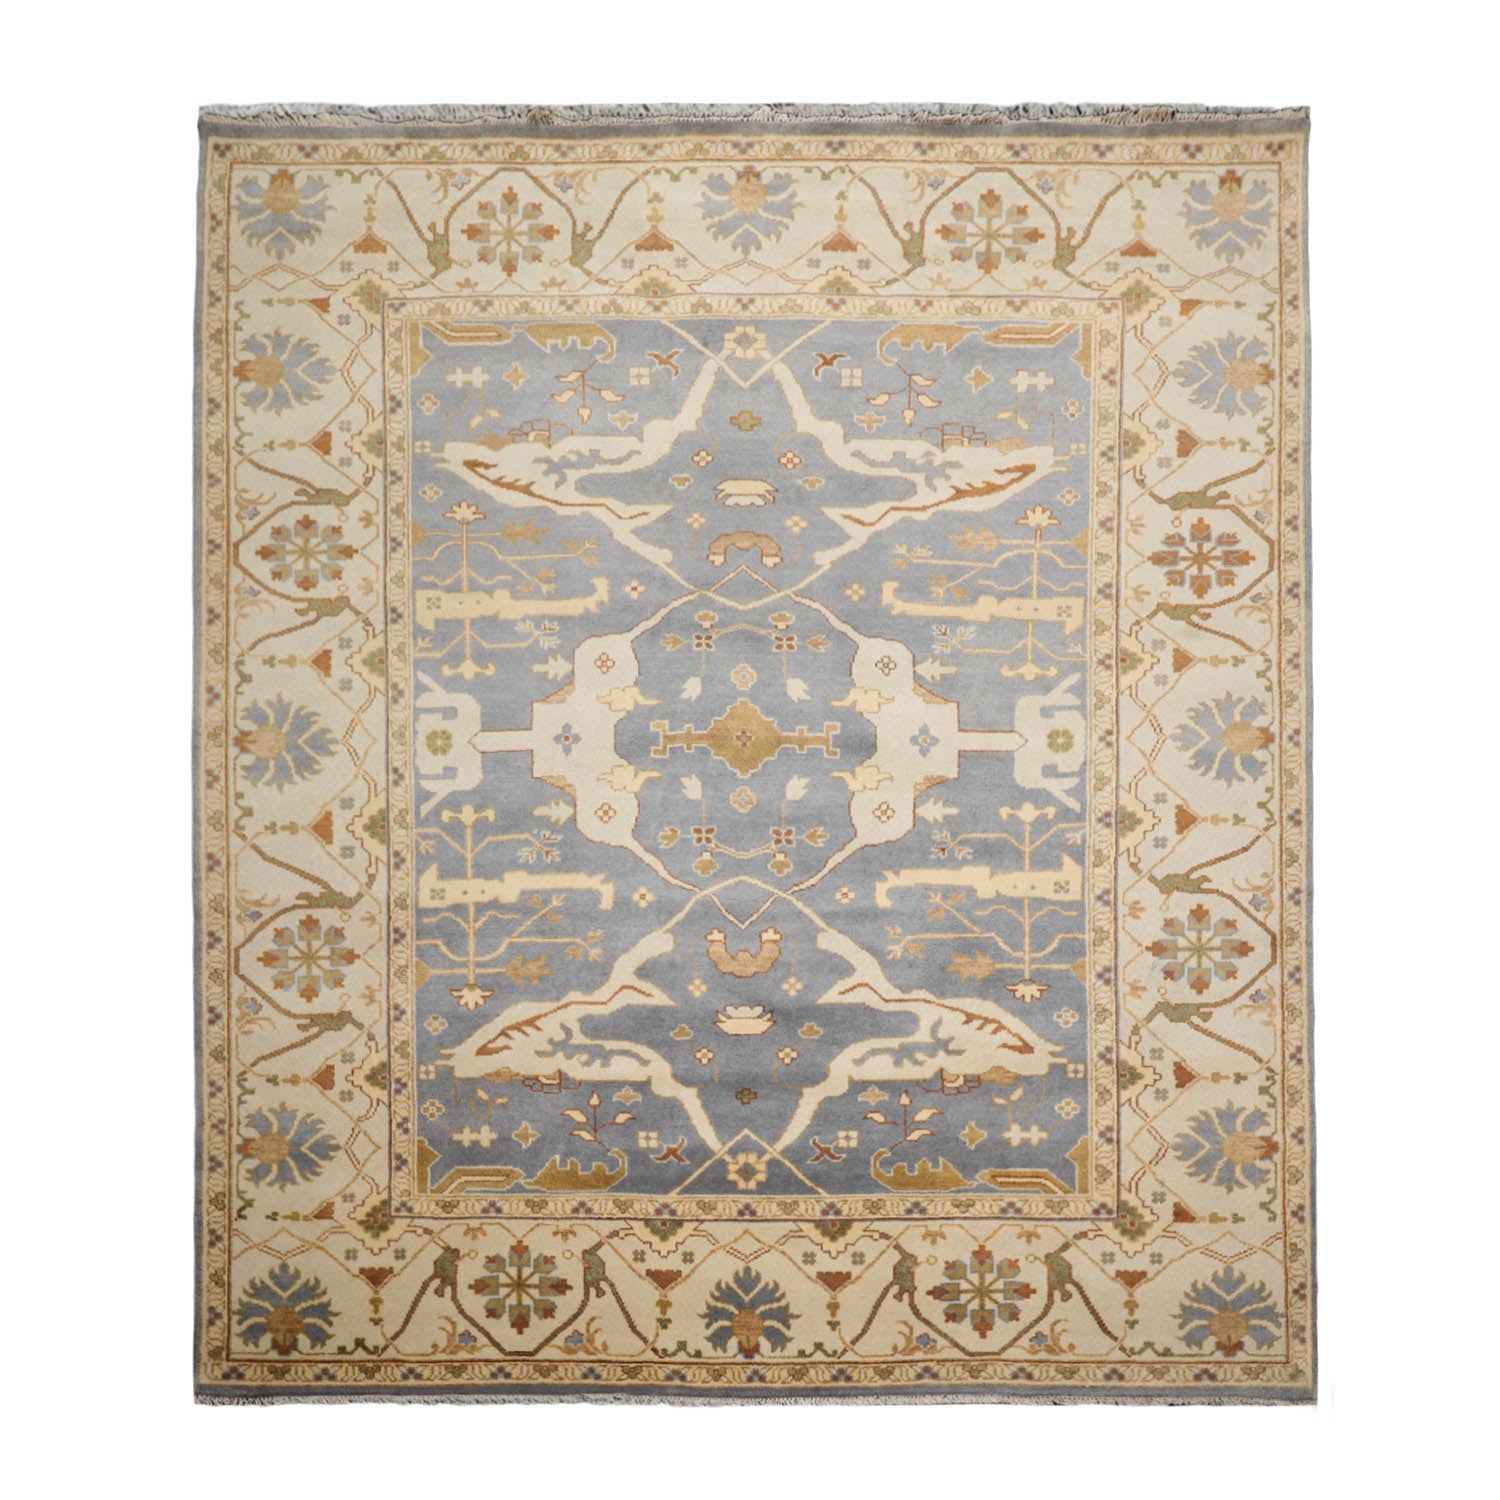 Elyh 9x12 Hand Knotted 100% Wool Oushak Traditional Oriental Area Rug Blue, Beige Color